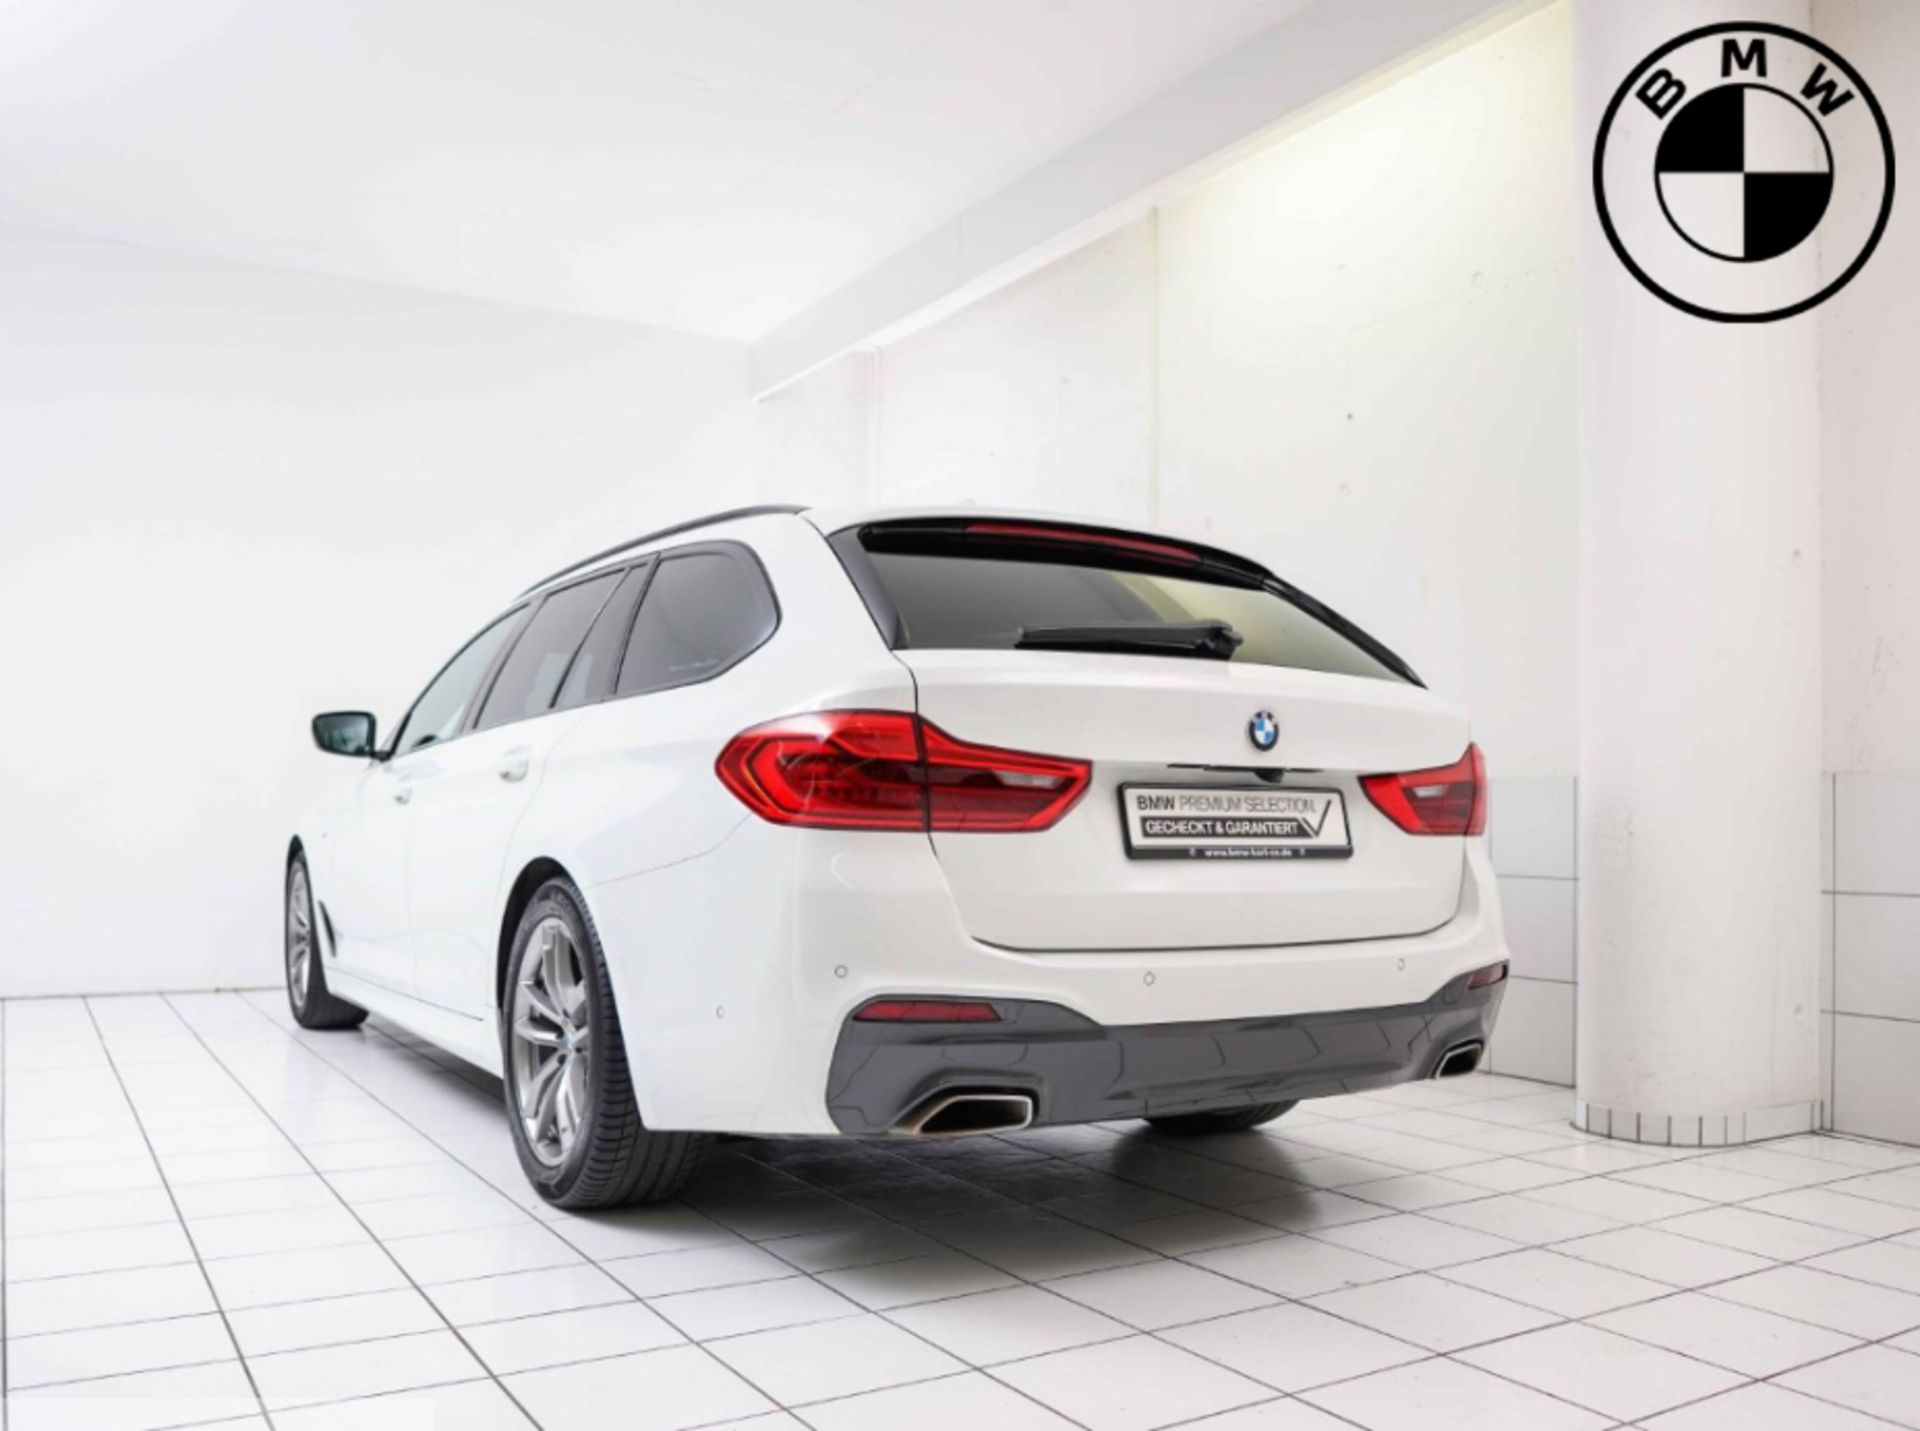 BMW 520d Touring - Image 3 of 9